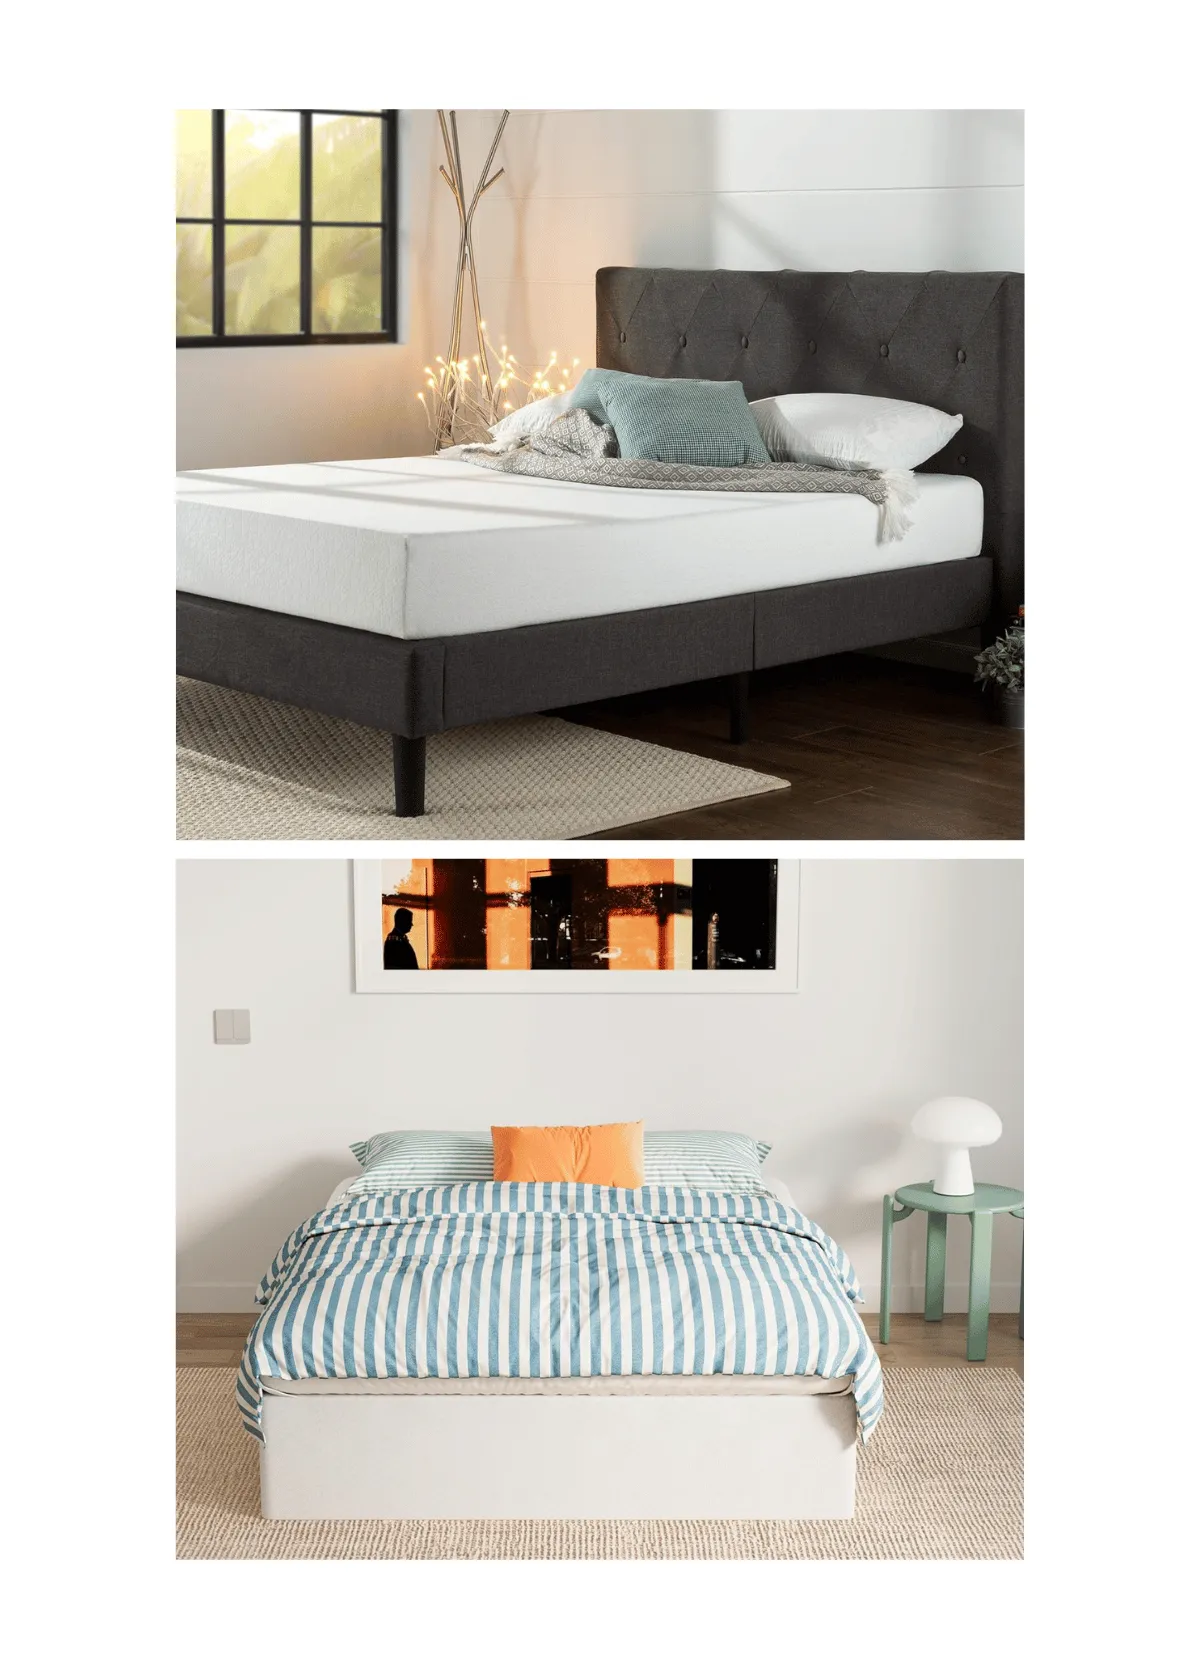 "Platform Beds vs Box Springs: Which is Best for Your Mattress?"